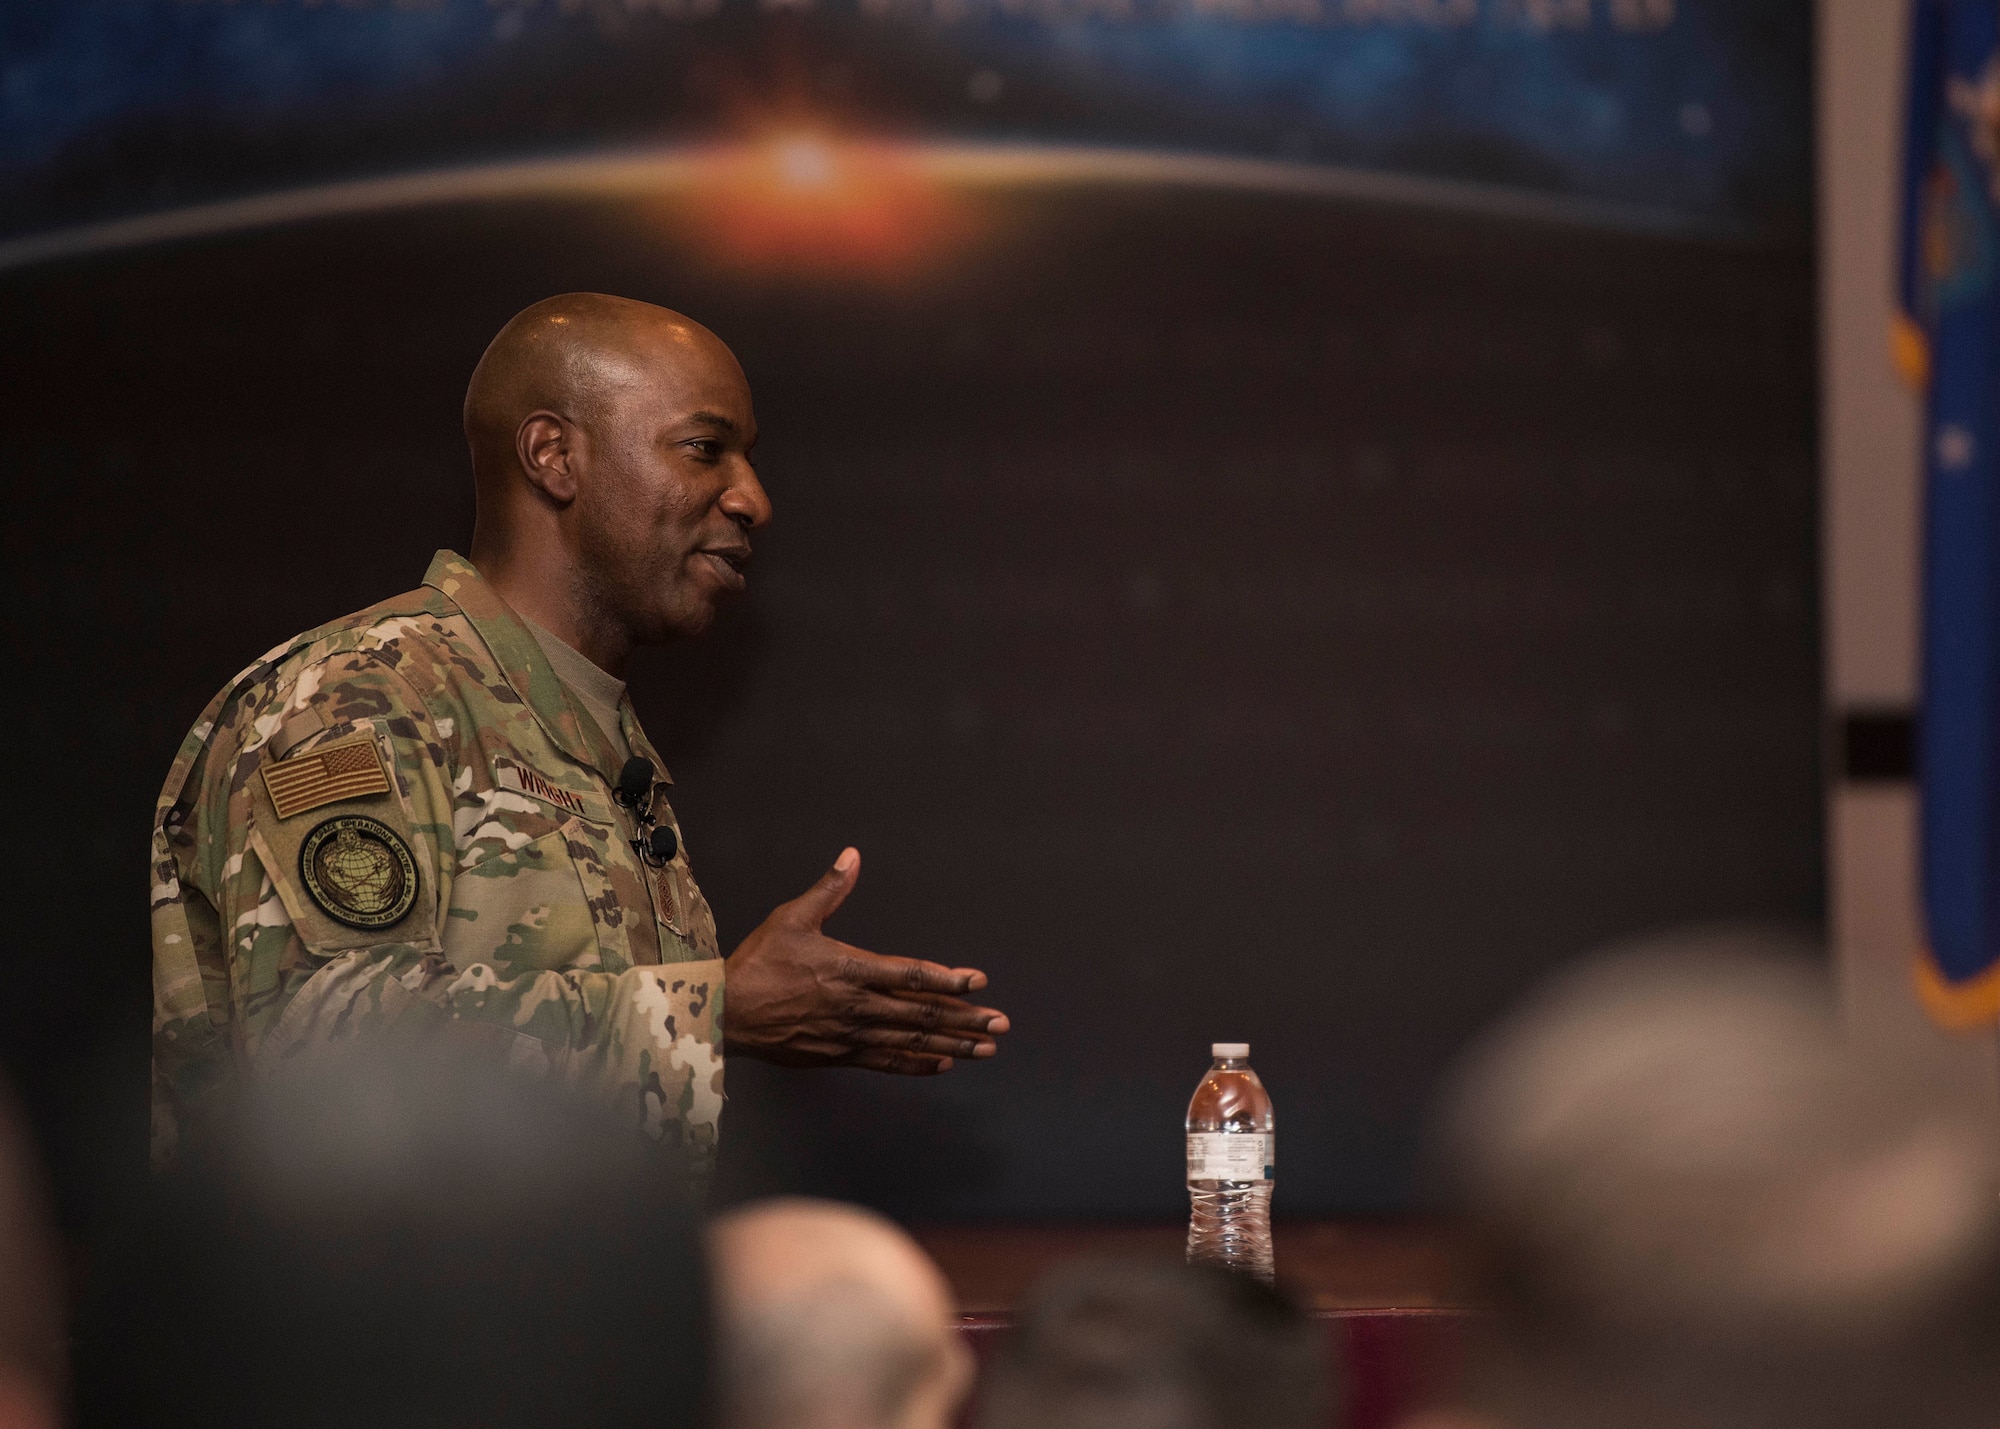 Chief Master Sergeant of the Air Force Kaleth O. Wright speaks during an all call Sept. 25, 2019, at Vandenberg Air Force Base, Calif. While at Vandenberg, Wright hosted an all call and visited multiple units across the installation including the 30th Medical Group, 30th Mission Support Group and the Combined Space Operations Center. (U.S. Air Force photo by Airmen 1st Class Hanah Abercrombie)